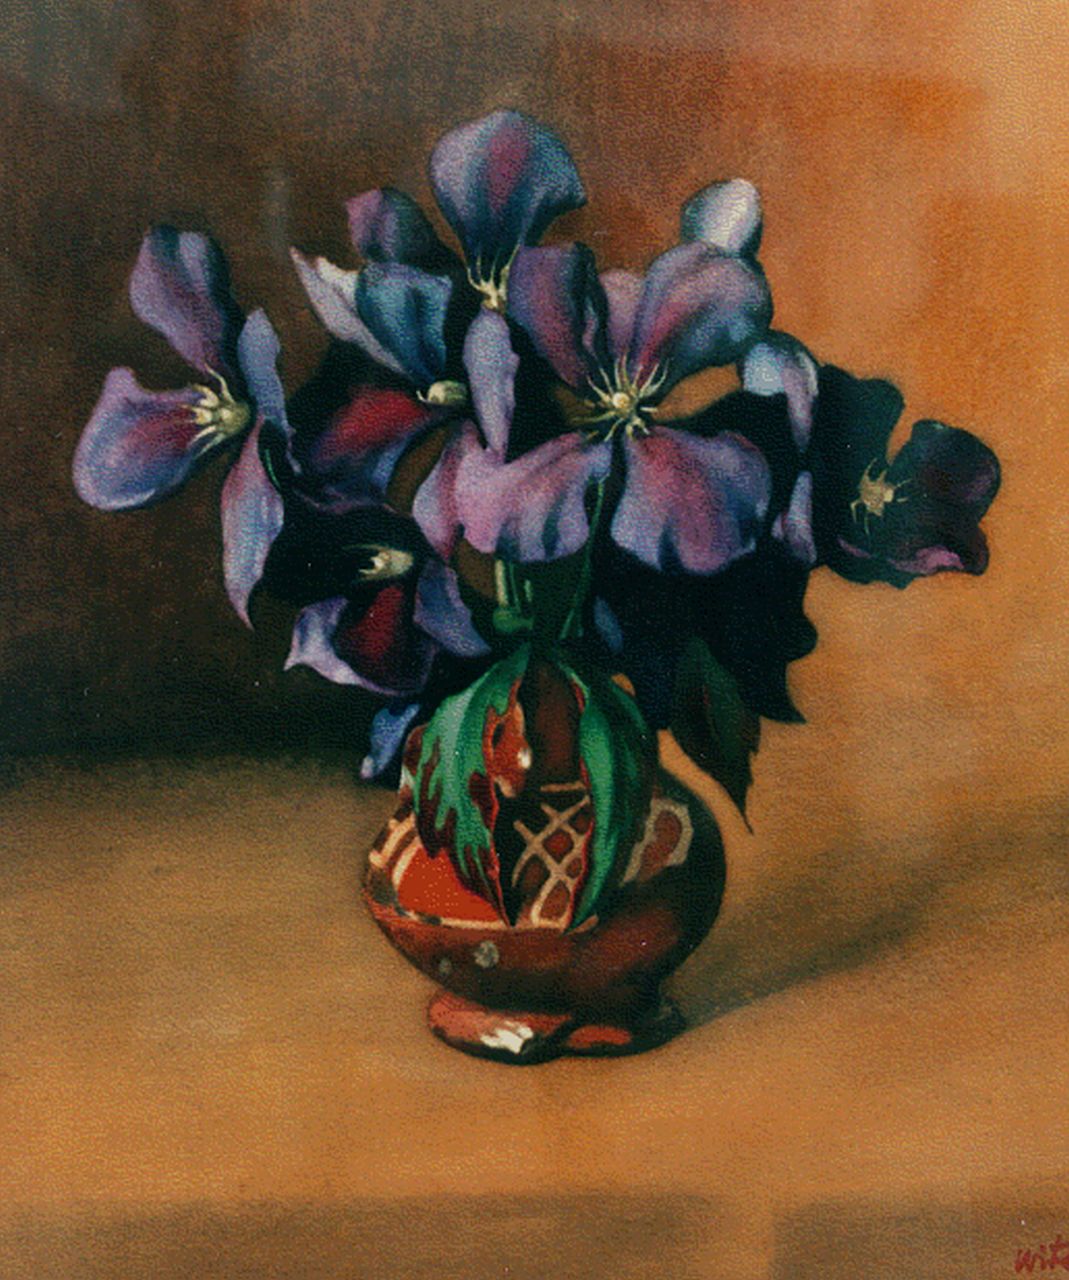 Witsen W.A.  | 'Willem' Arnold Witsen, A still life with clematis, watercolour on paper 52.0 x 43.0 cm, signed l.r.